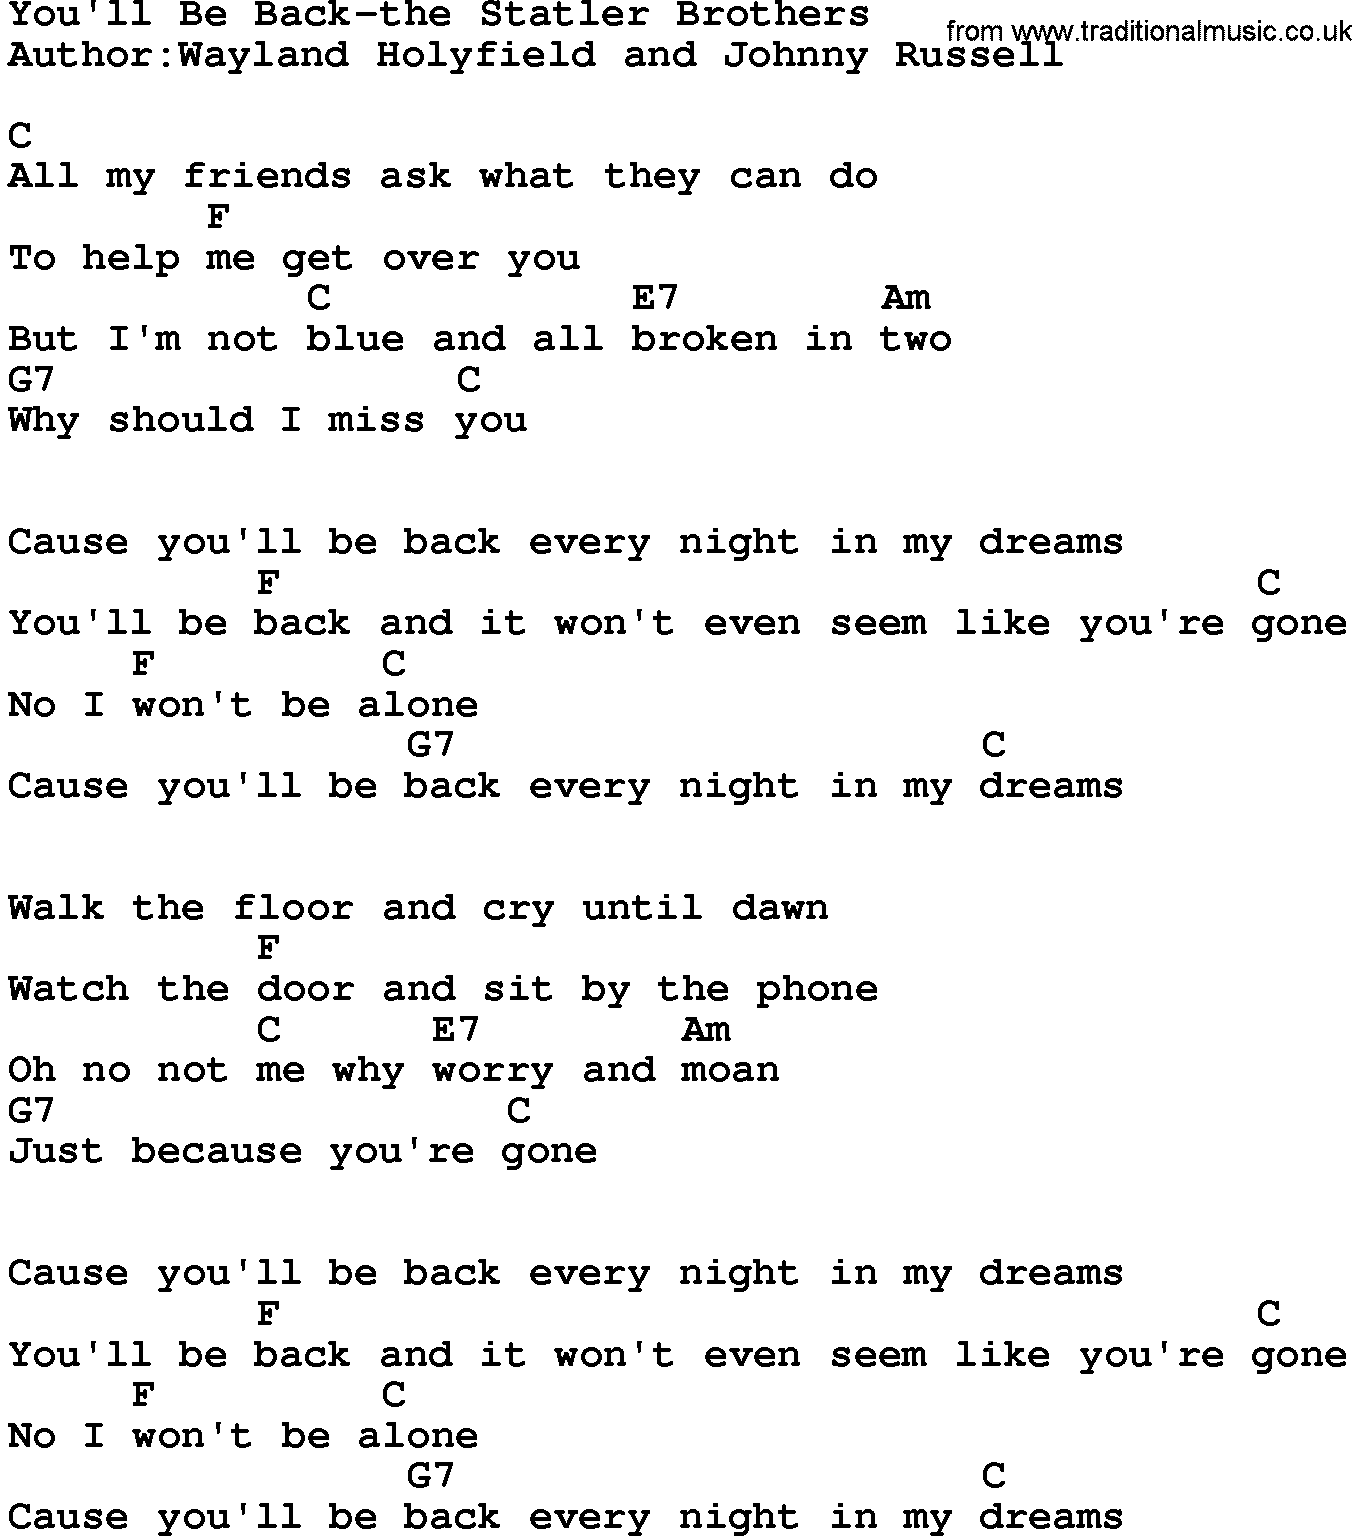 Country music song: You'll Be Back-The Statler Brothers lyrics and chords